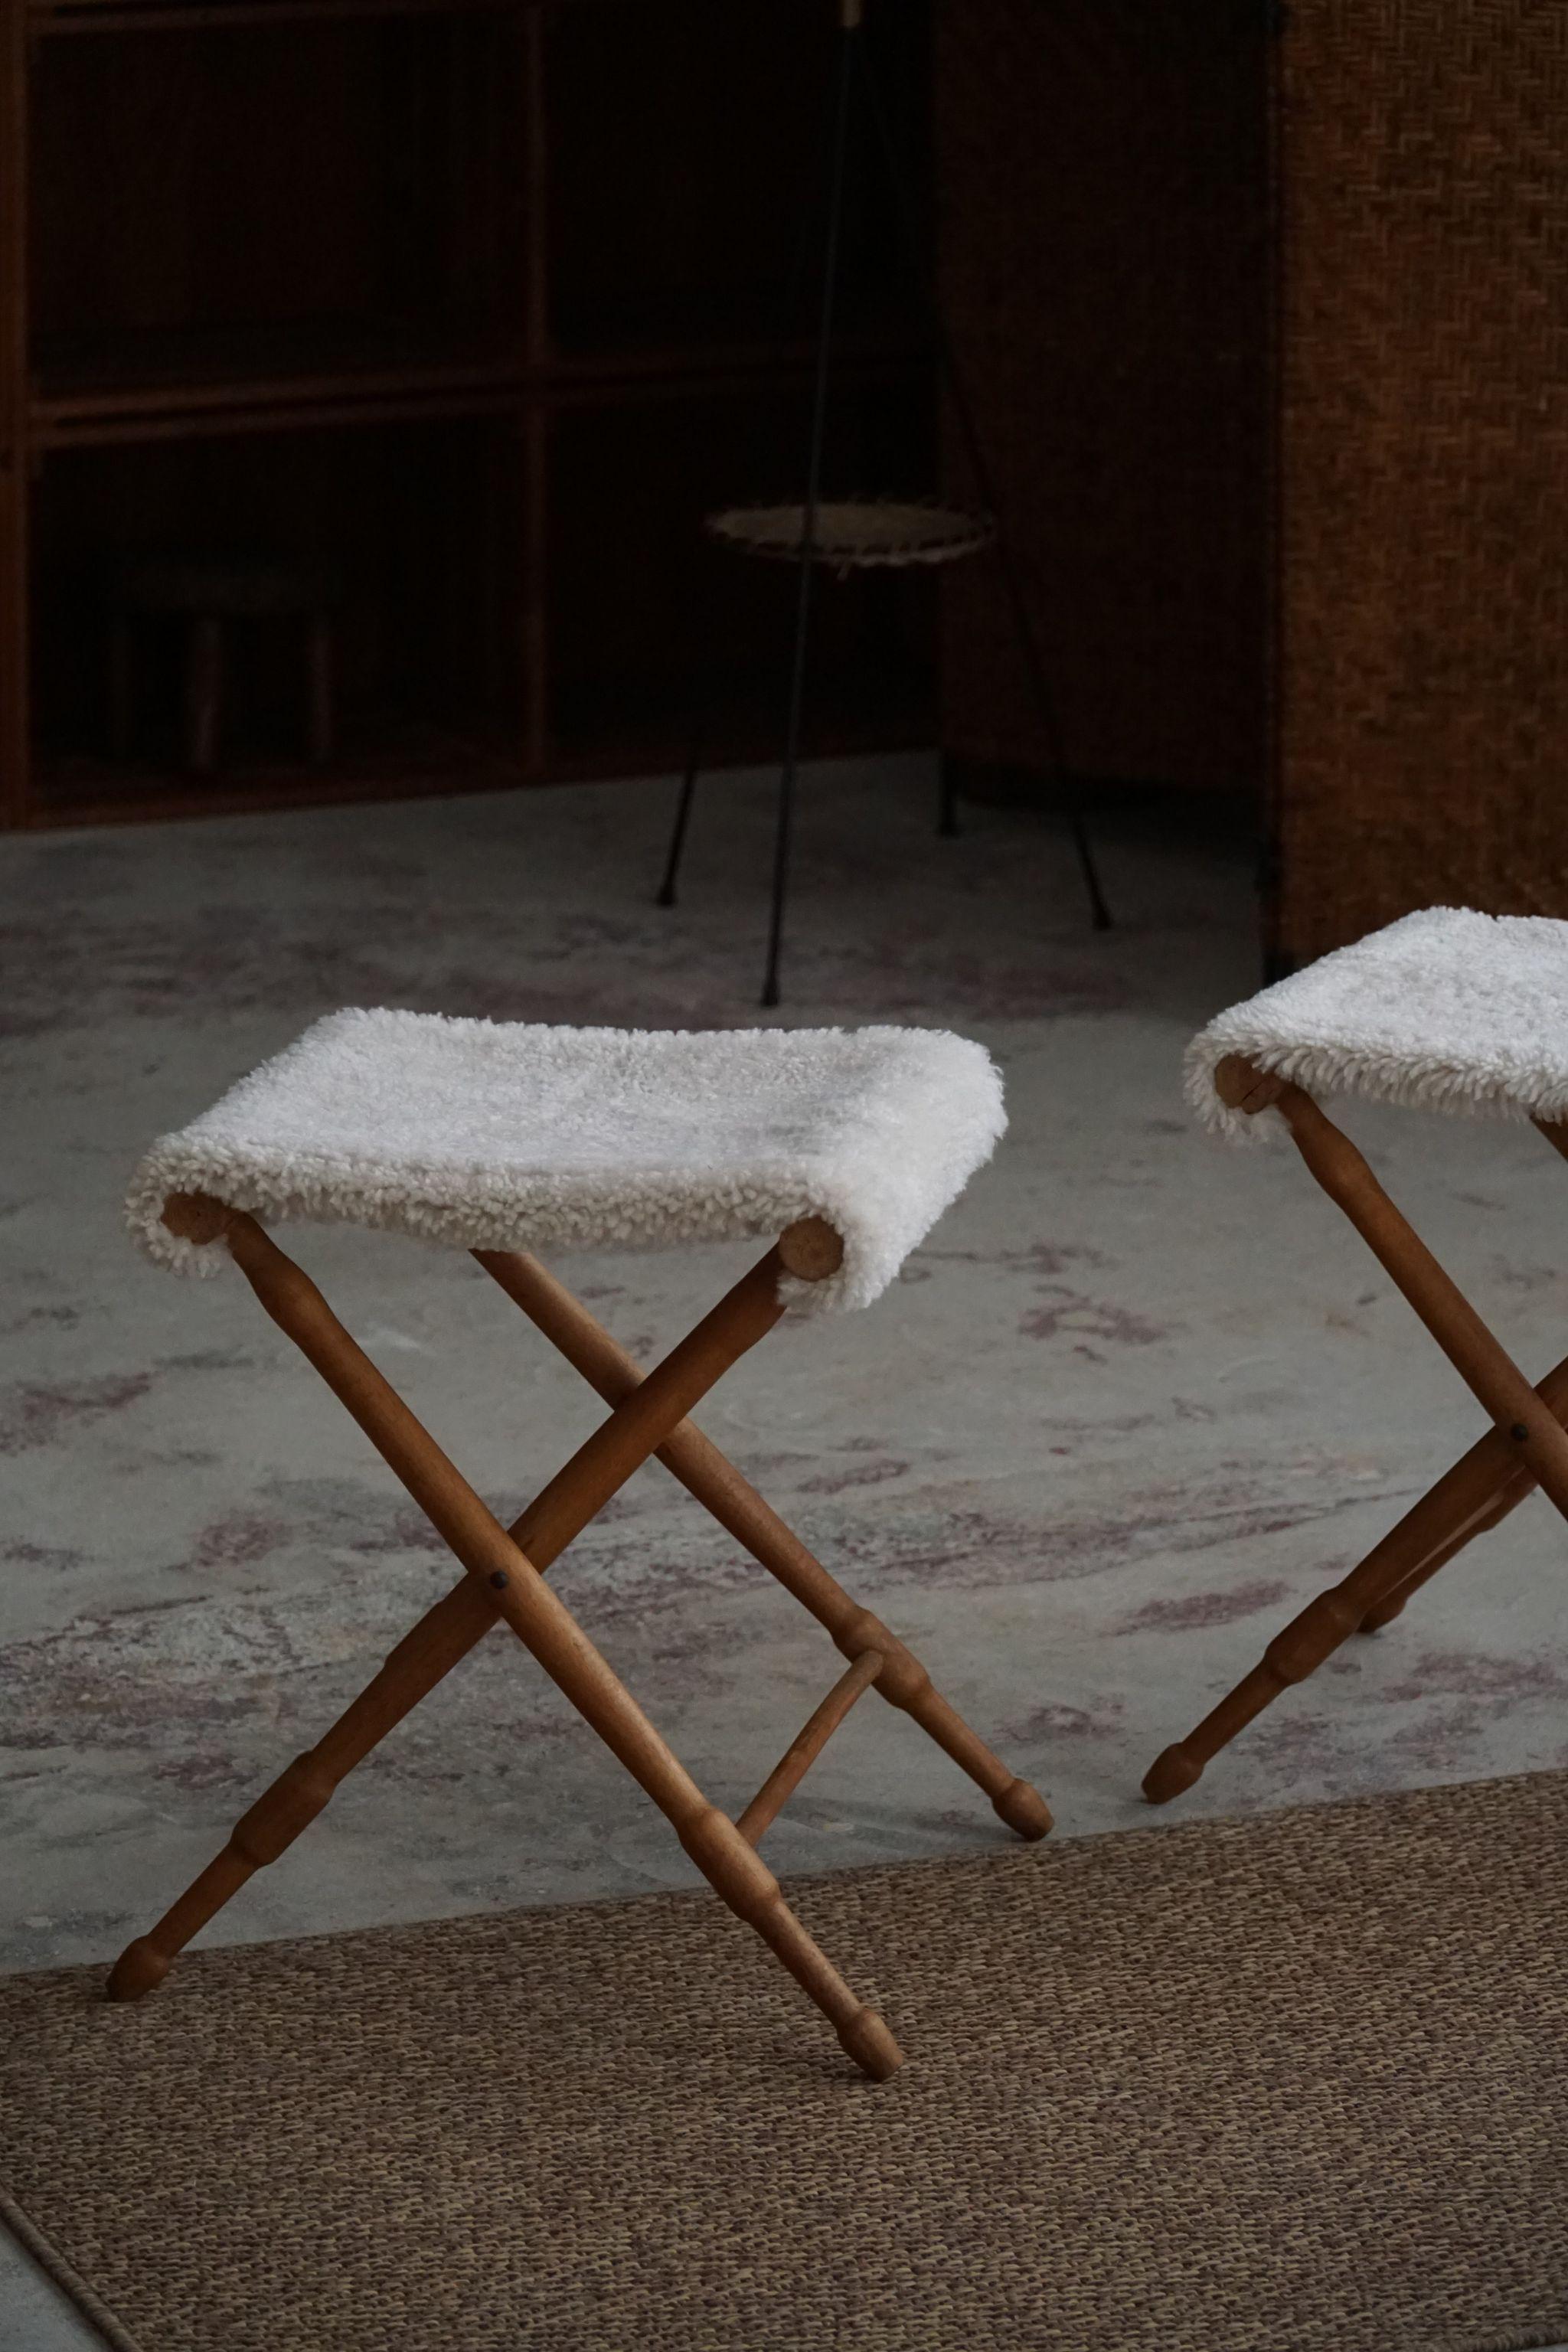 Foldable Stools, Reupholstered in Lambswool, Danish Mid-Century Modern, 1950s 6